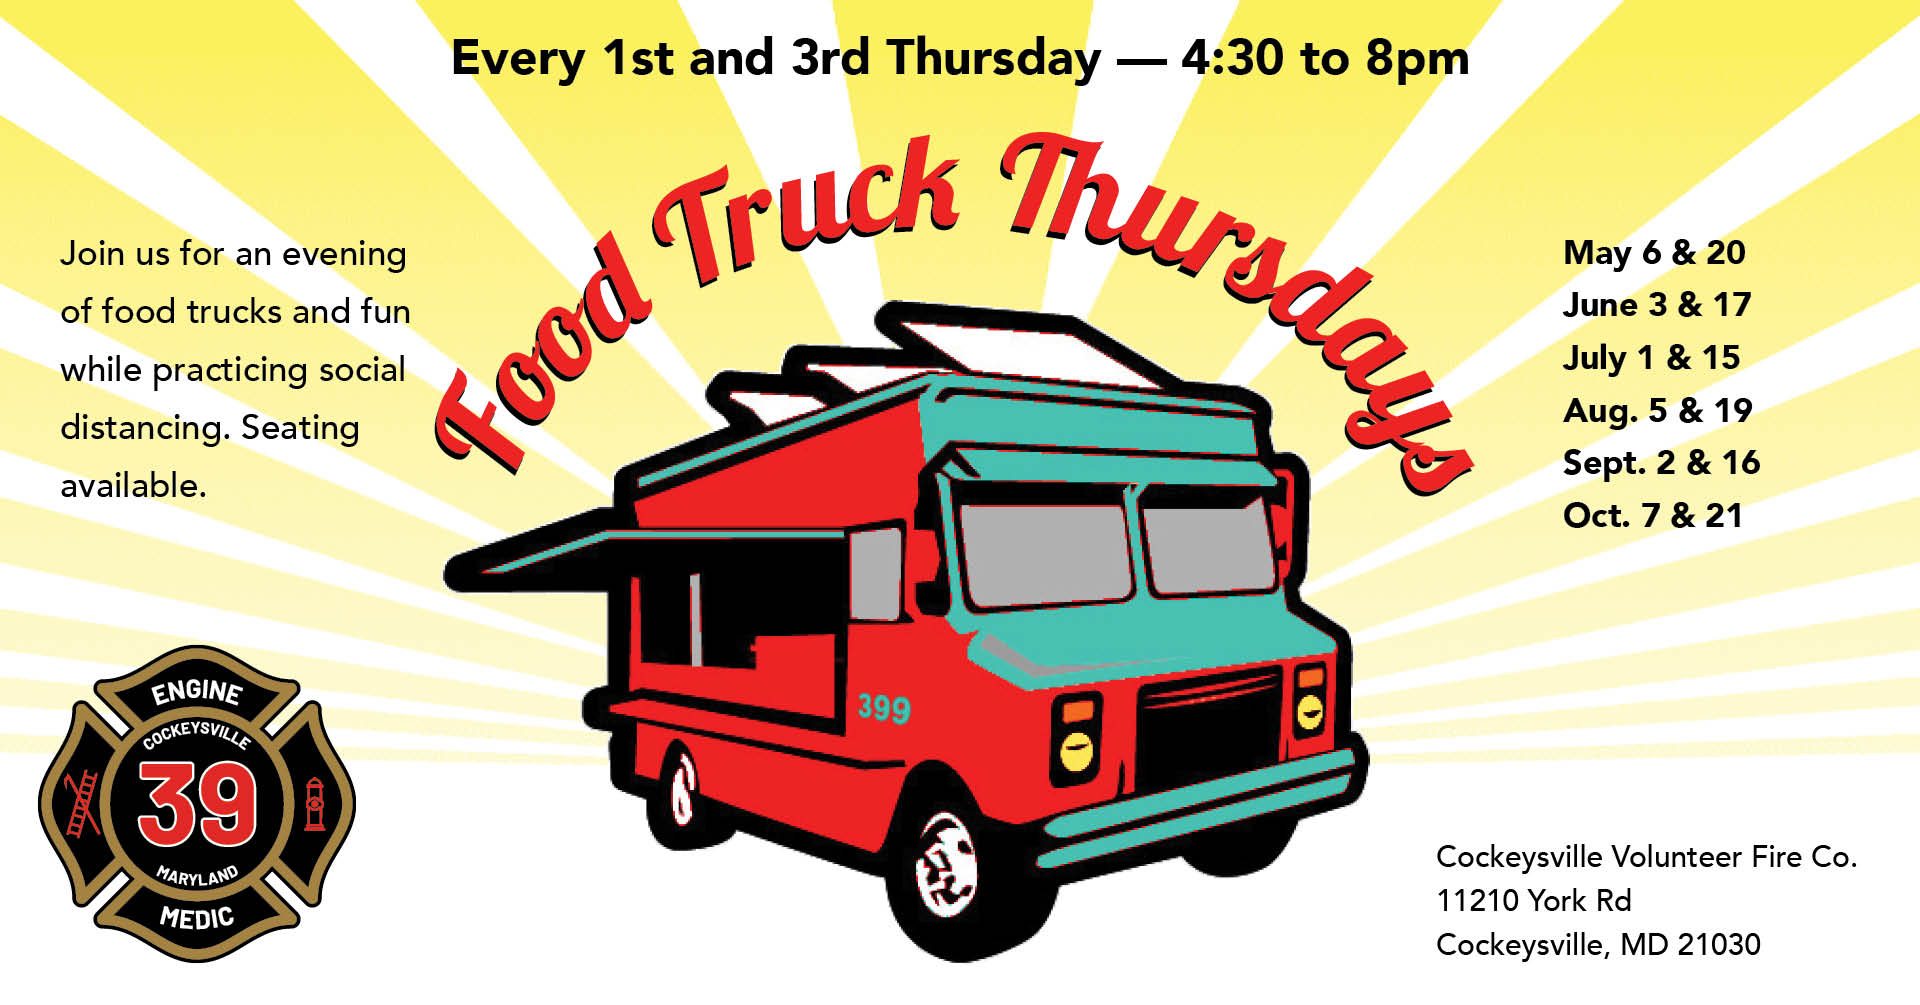 Food Truck Thursday Schedule Announced for 2021